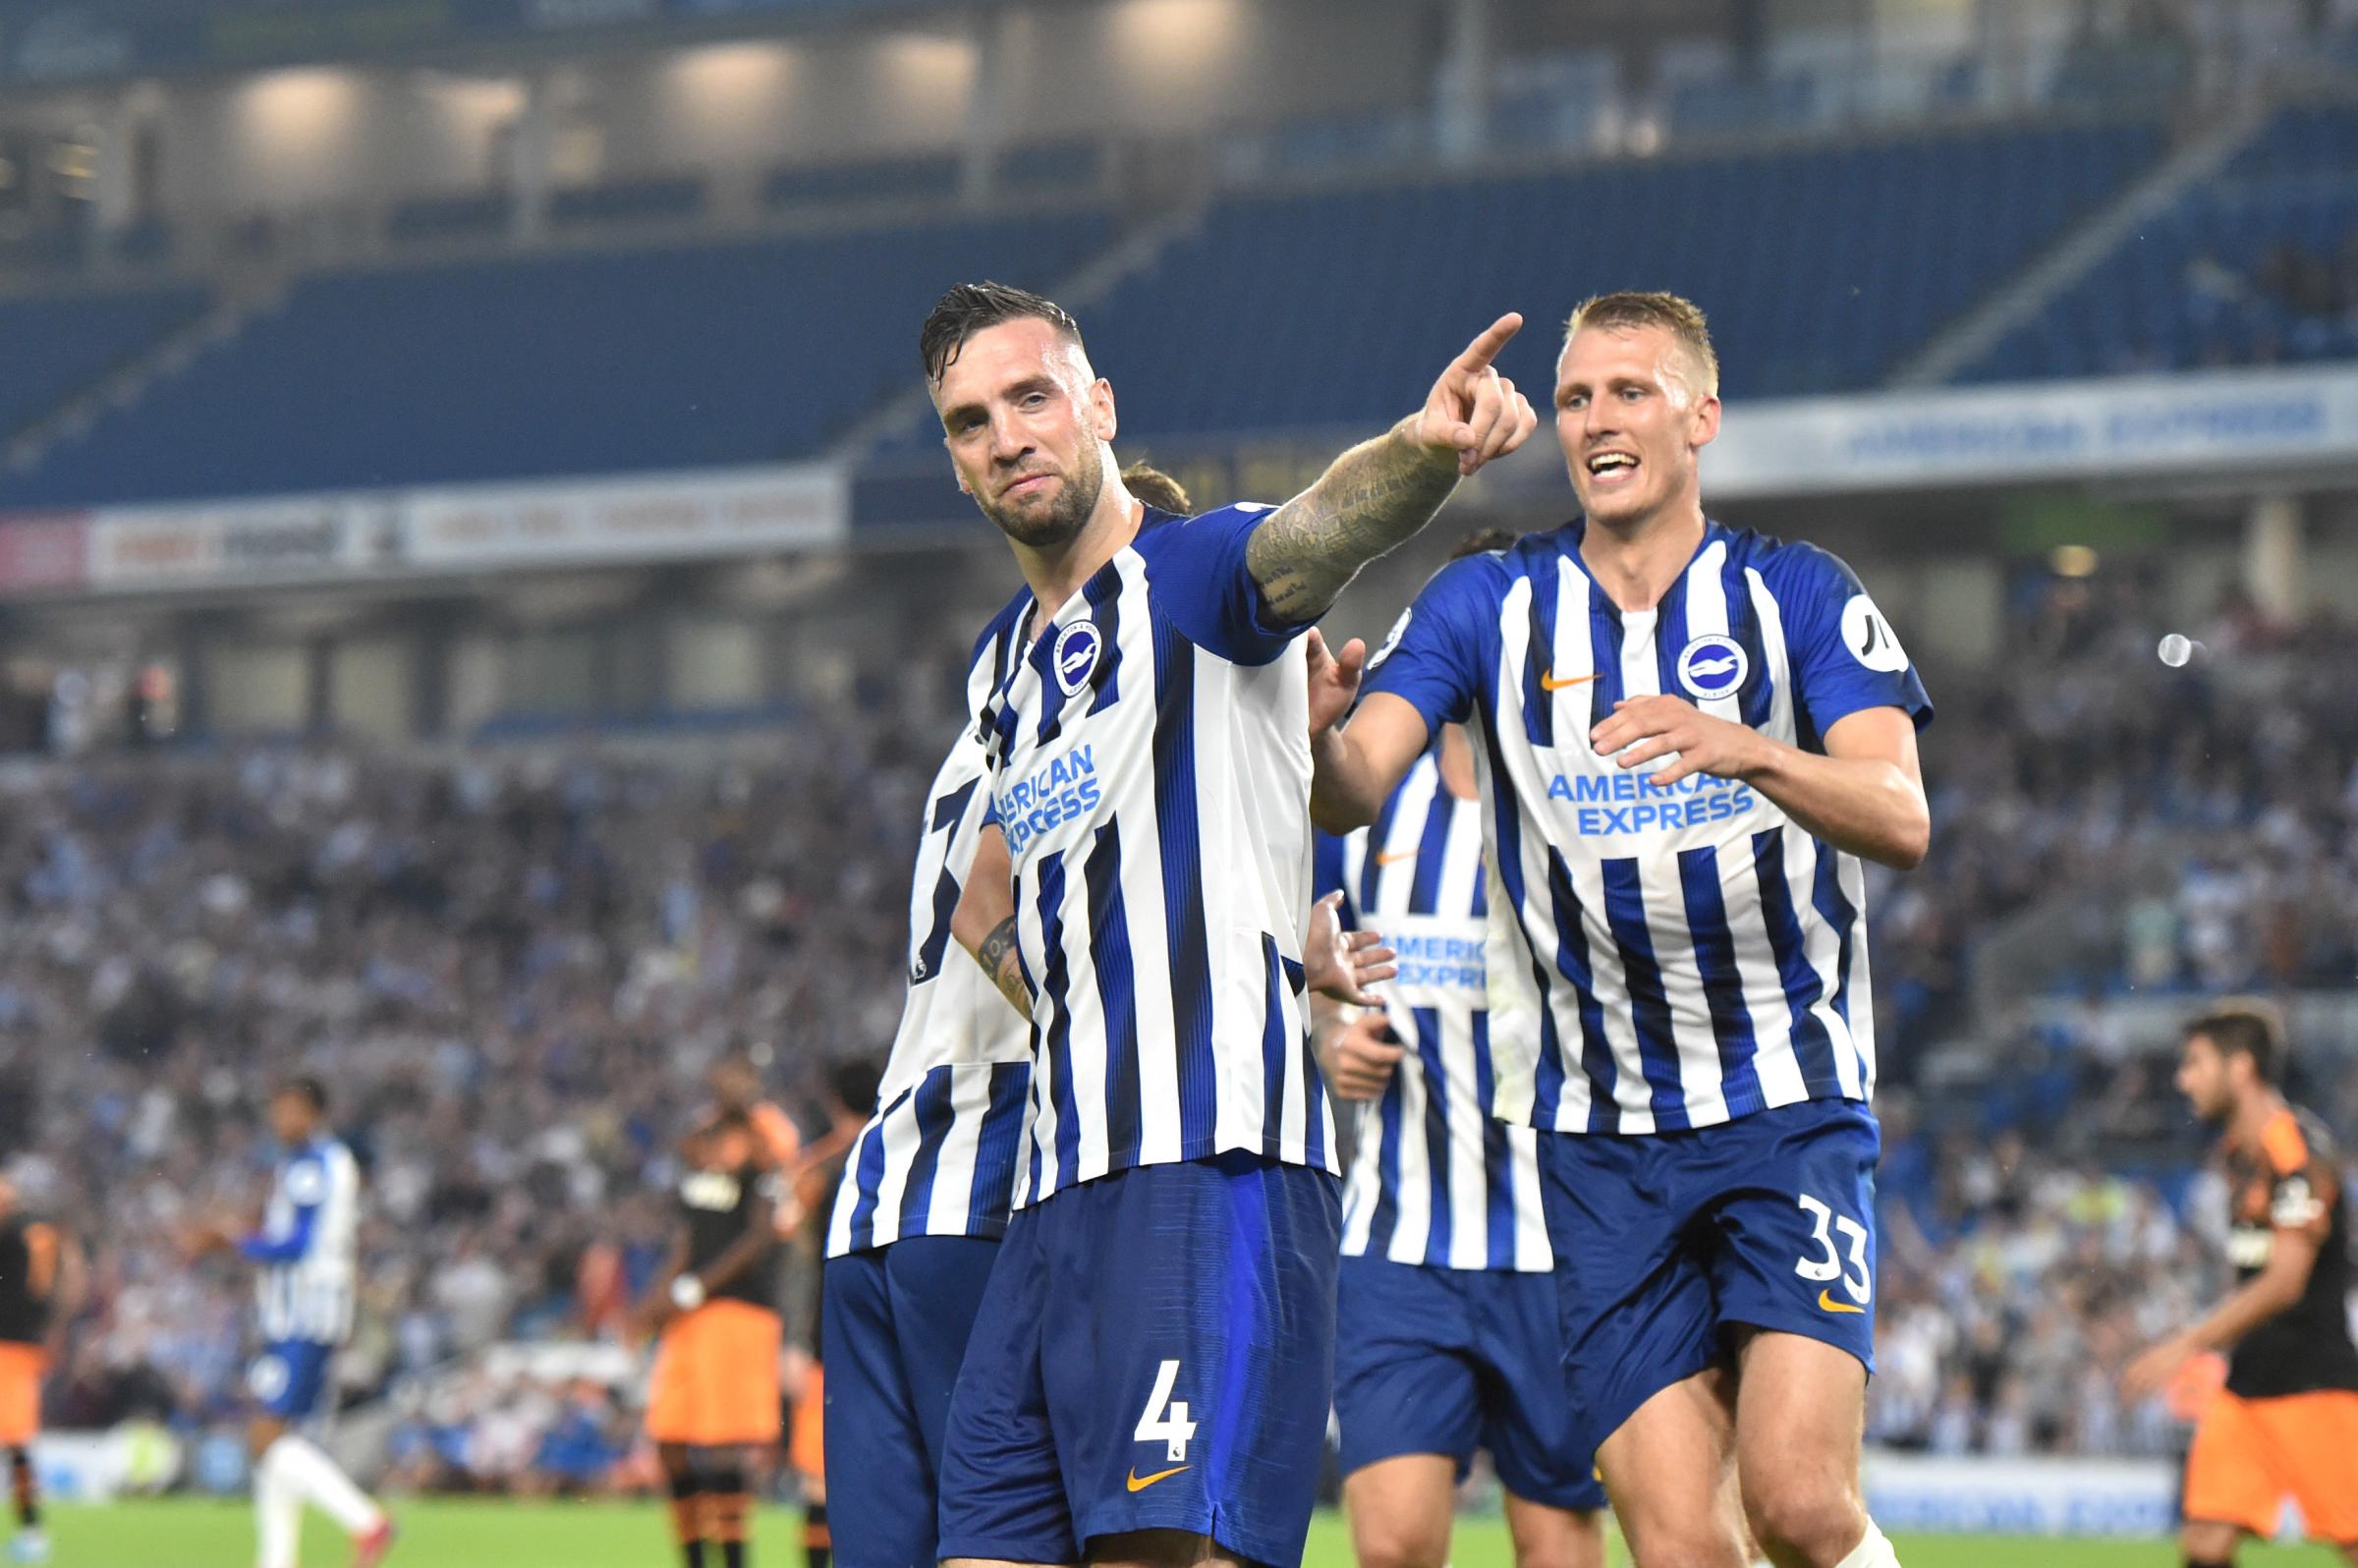 Albion transfer news: Shane Duffy linked with West Brom